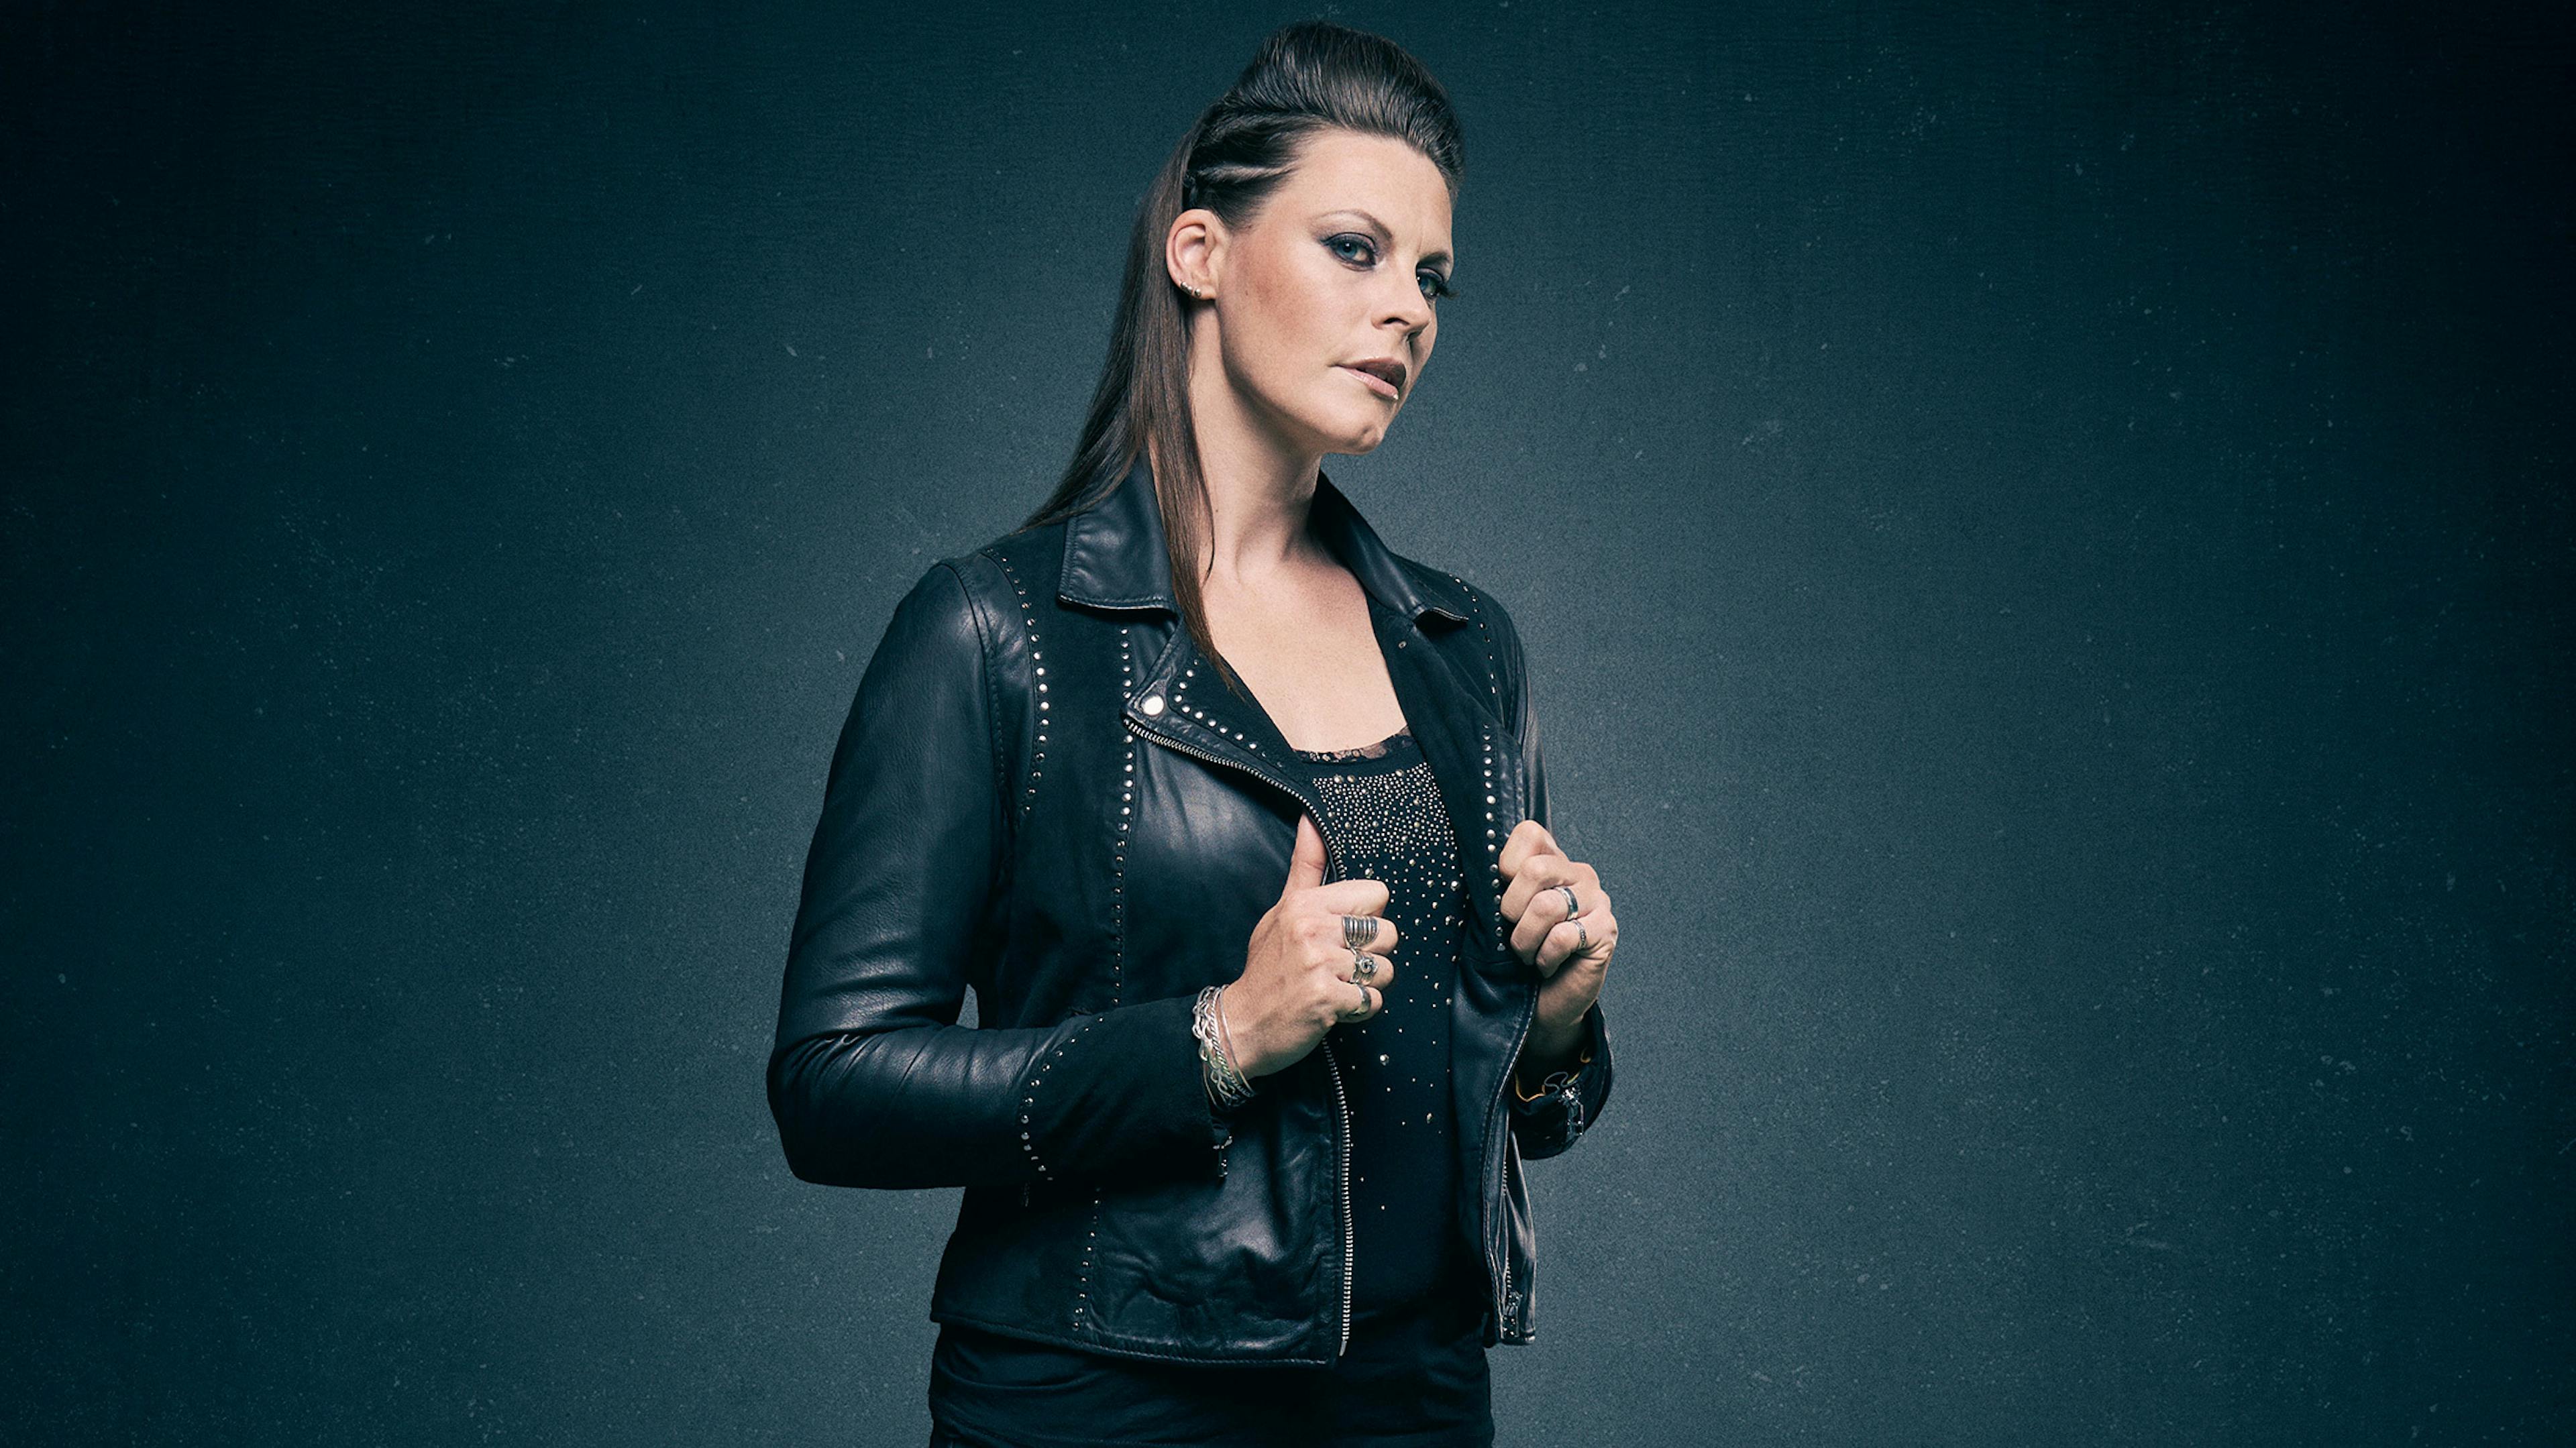 Nightwish's Floor Jansen: It's Time To Respect Our Planet